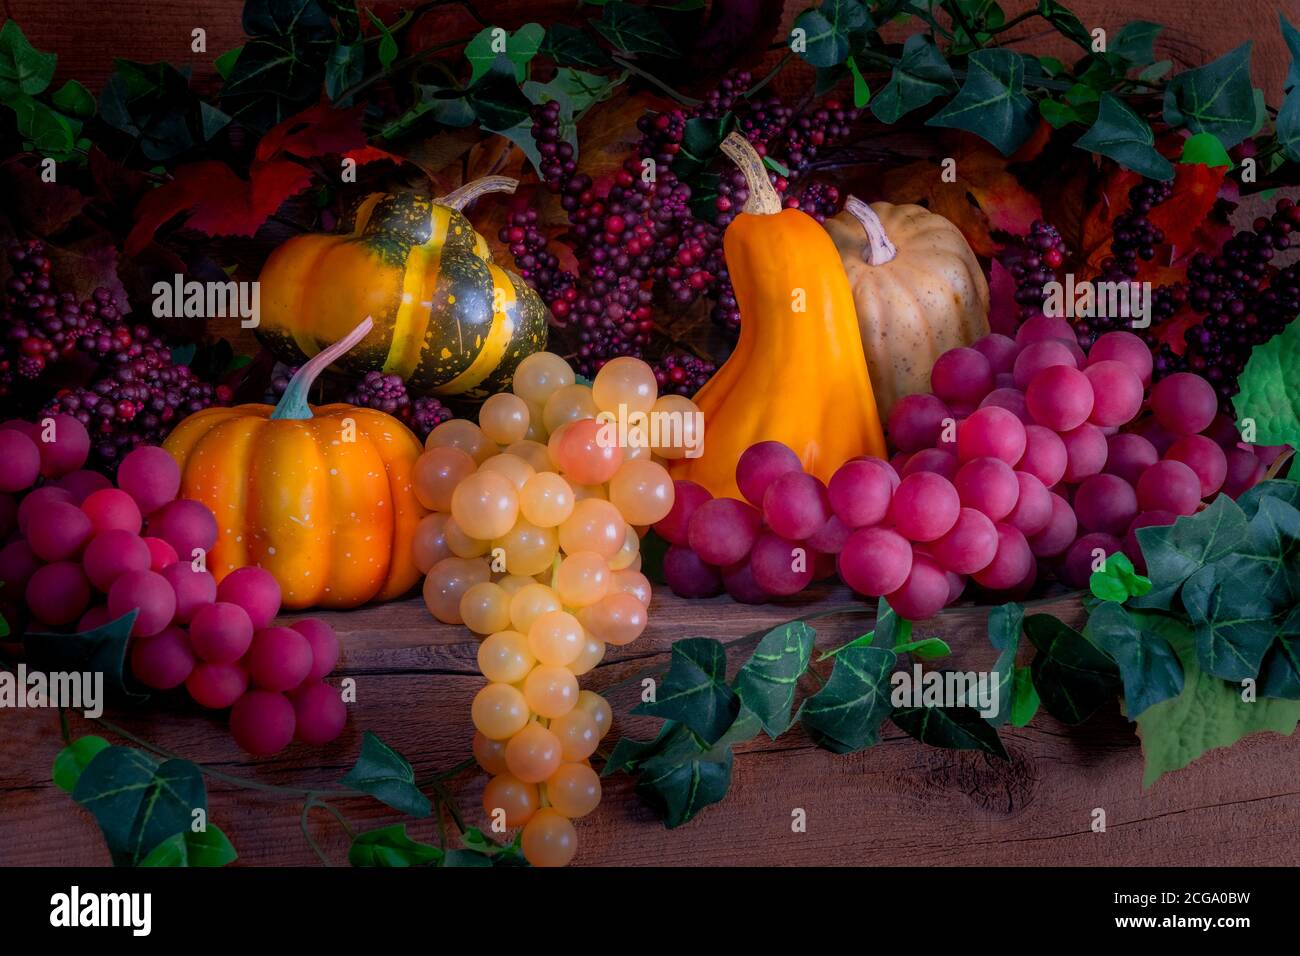 A rustic wood mantel is decorated with berries, grapes, pumpkins and gourds for the autumn celebrations. Stock Photo